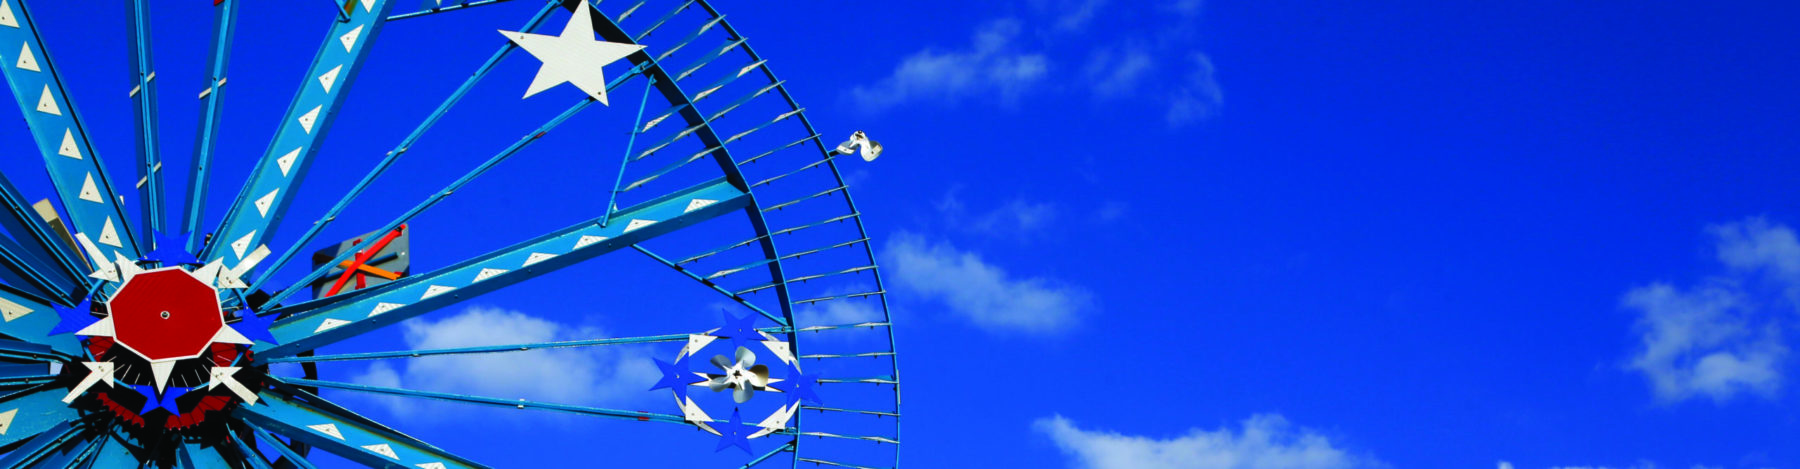 Part of Whirligig pictured next to blue sky and white clouds - Discover Wilson